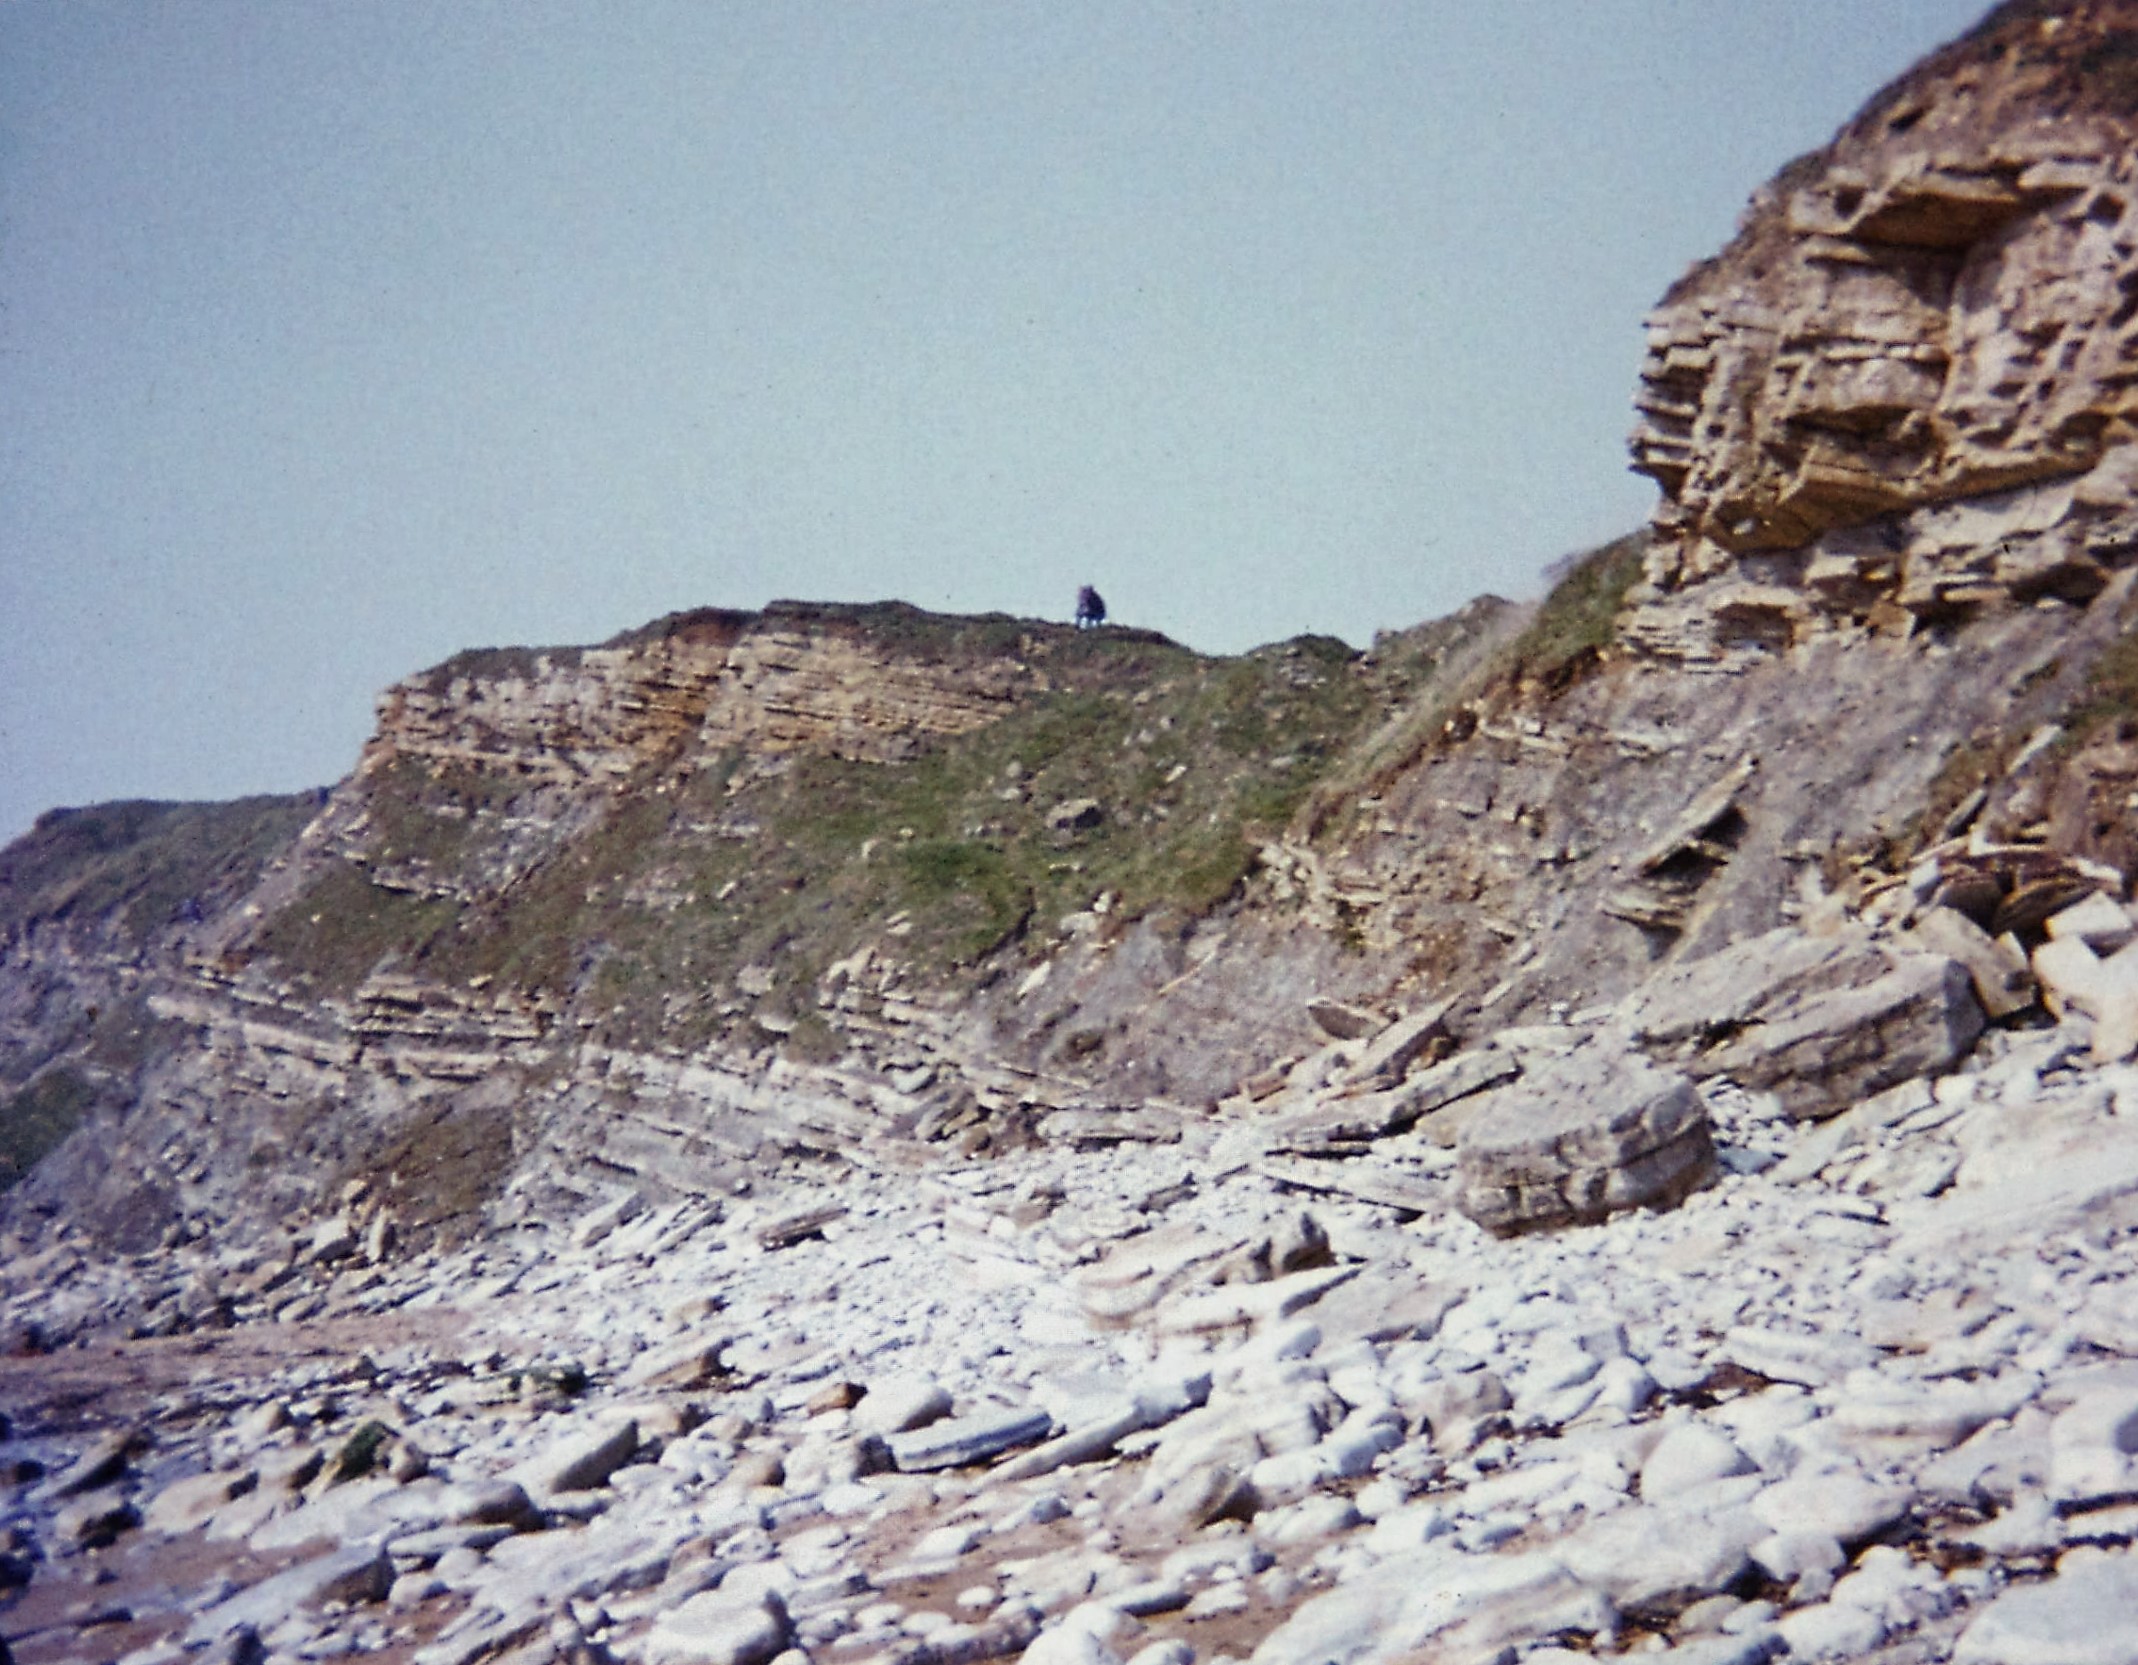 1979 Durlston Bay, Swanage (Purbeck Group)